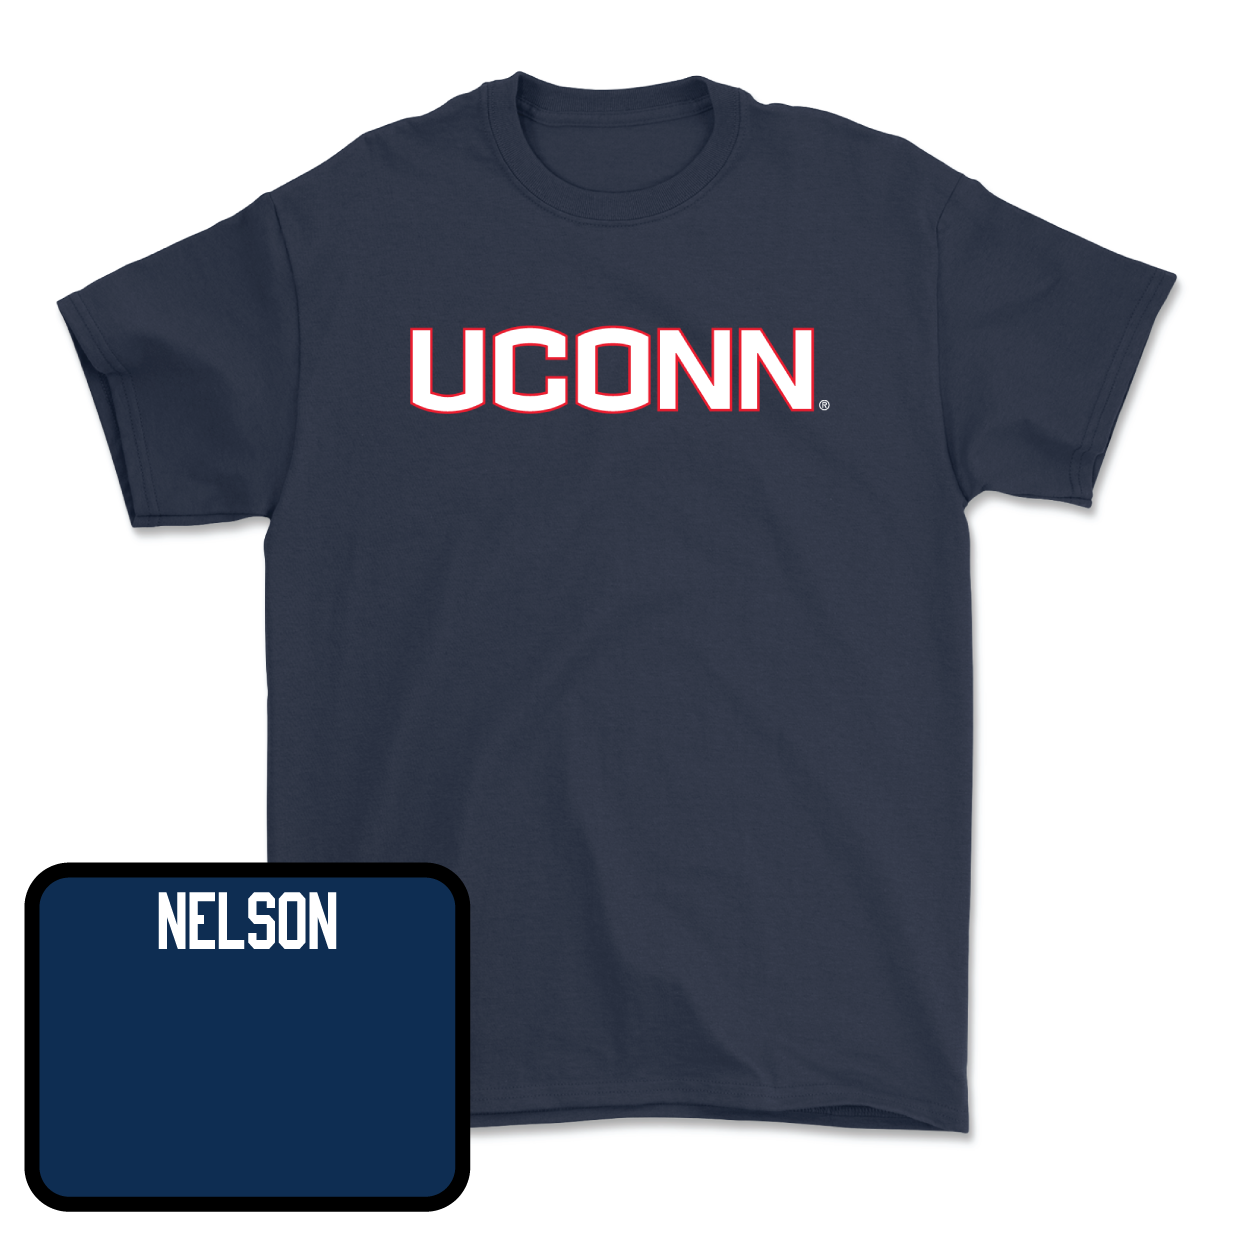 Navy Men's Golf UConn Tee Youth Small / Jared Nelson | #